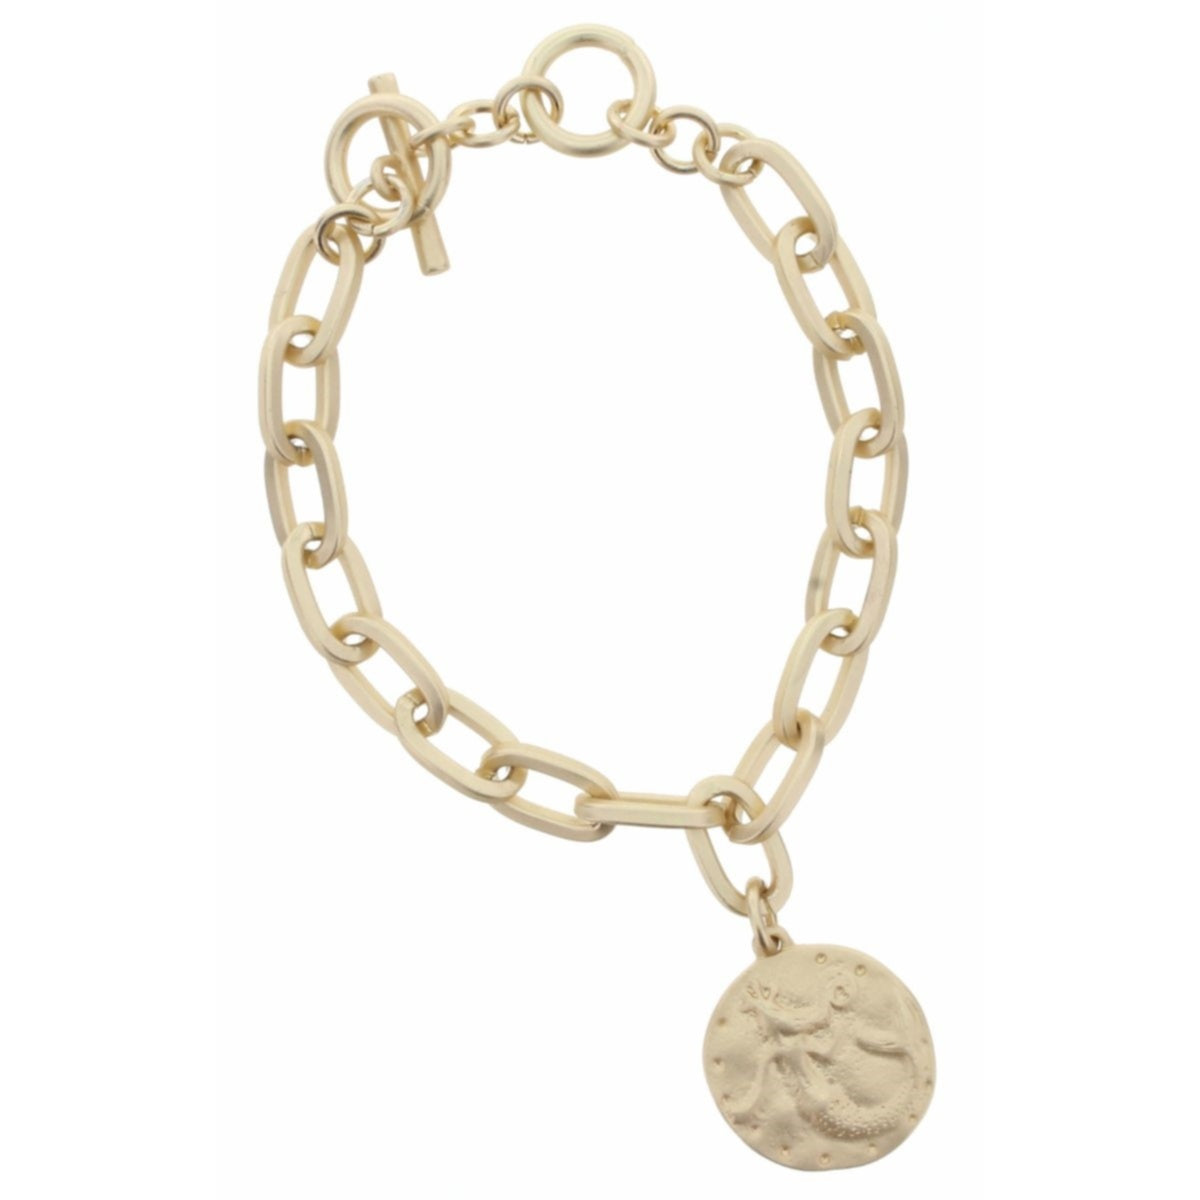 Gold Toggle Chain with Mermaid Charm Bracelet